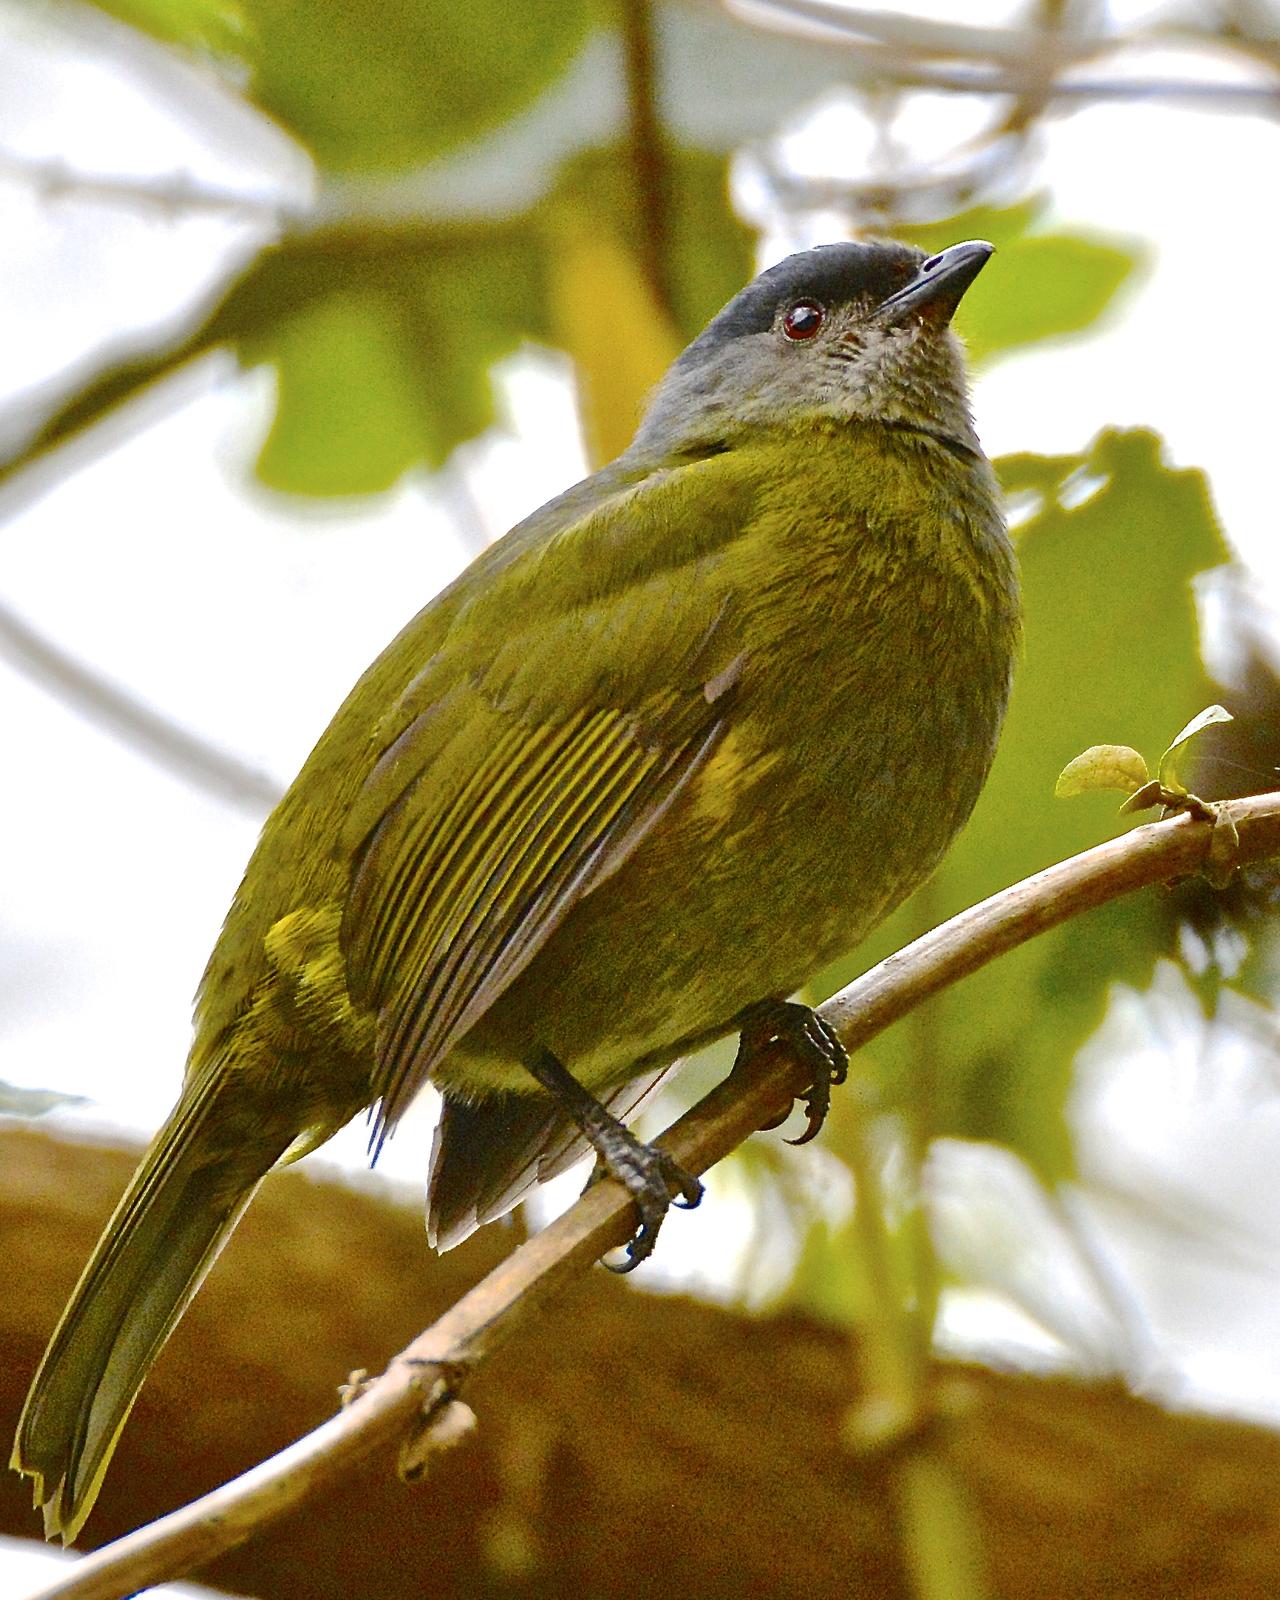 Black-and-yellow Silky-flycatcher Photo by Gerald Friesen